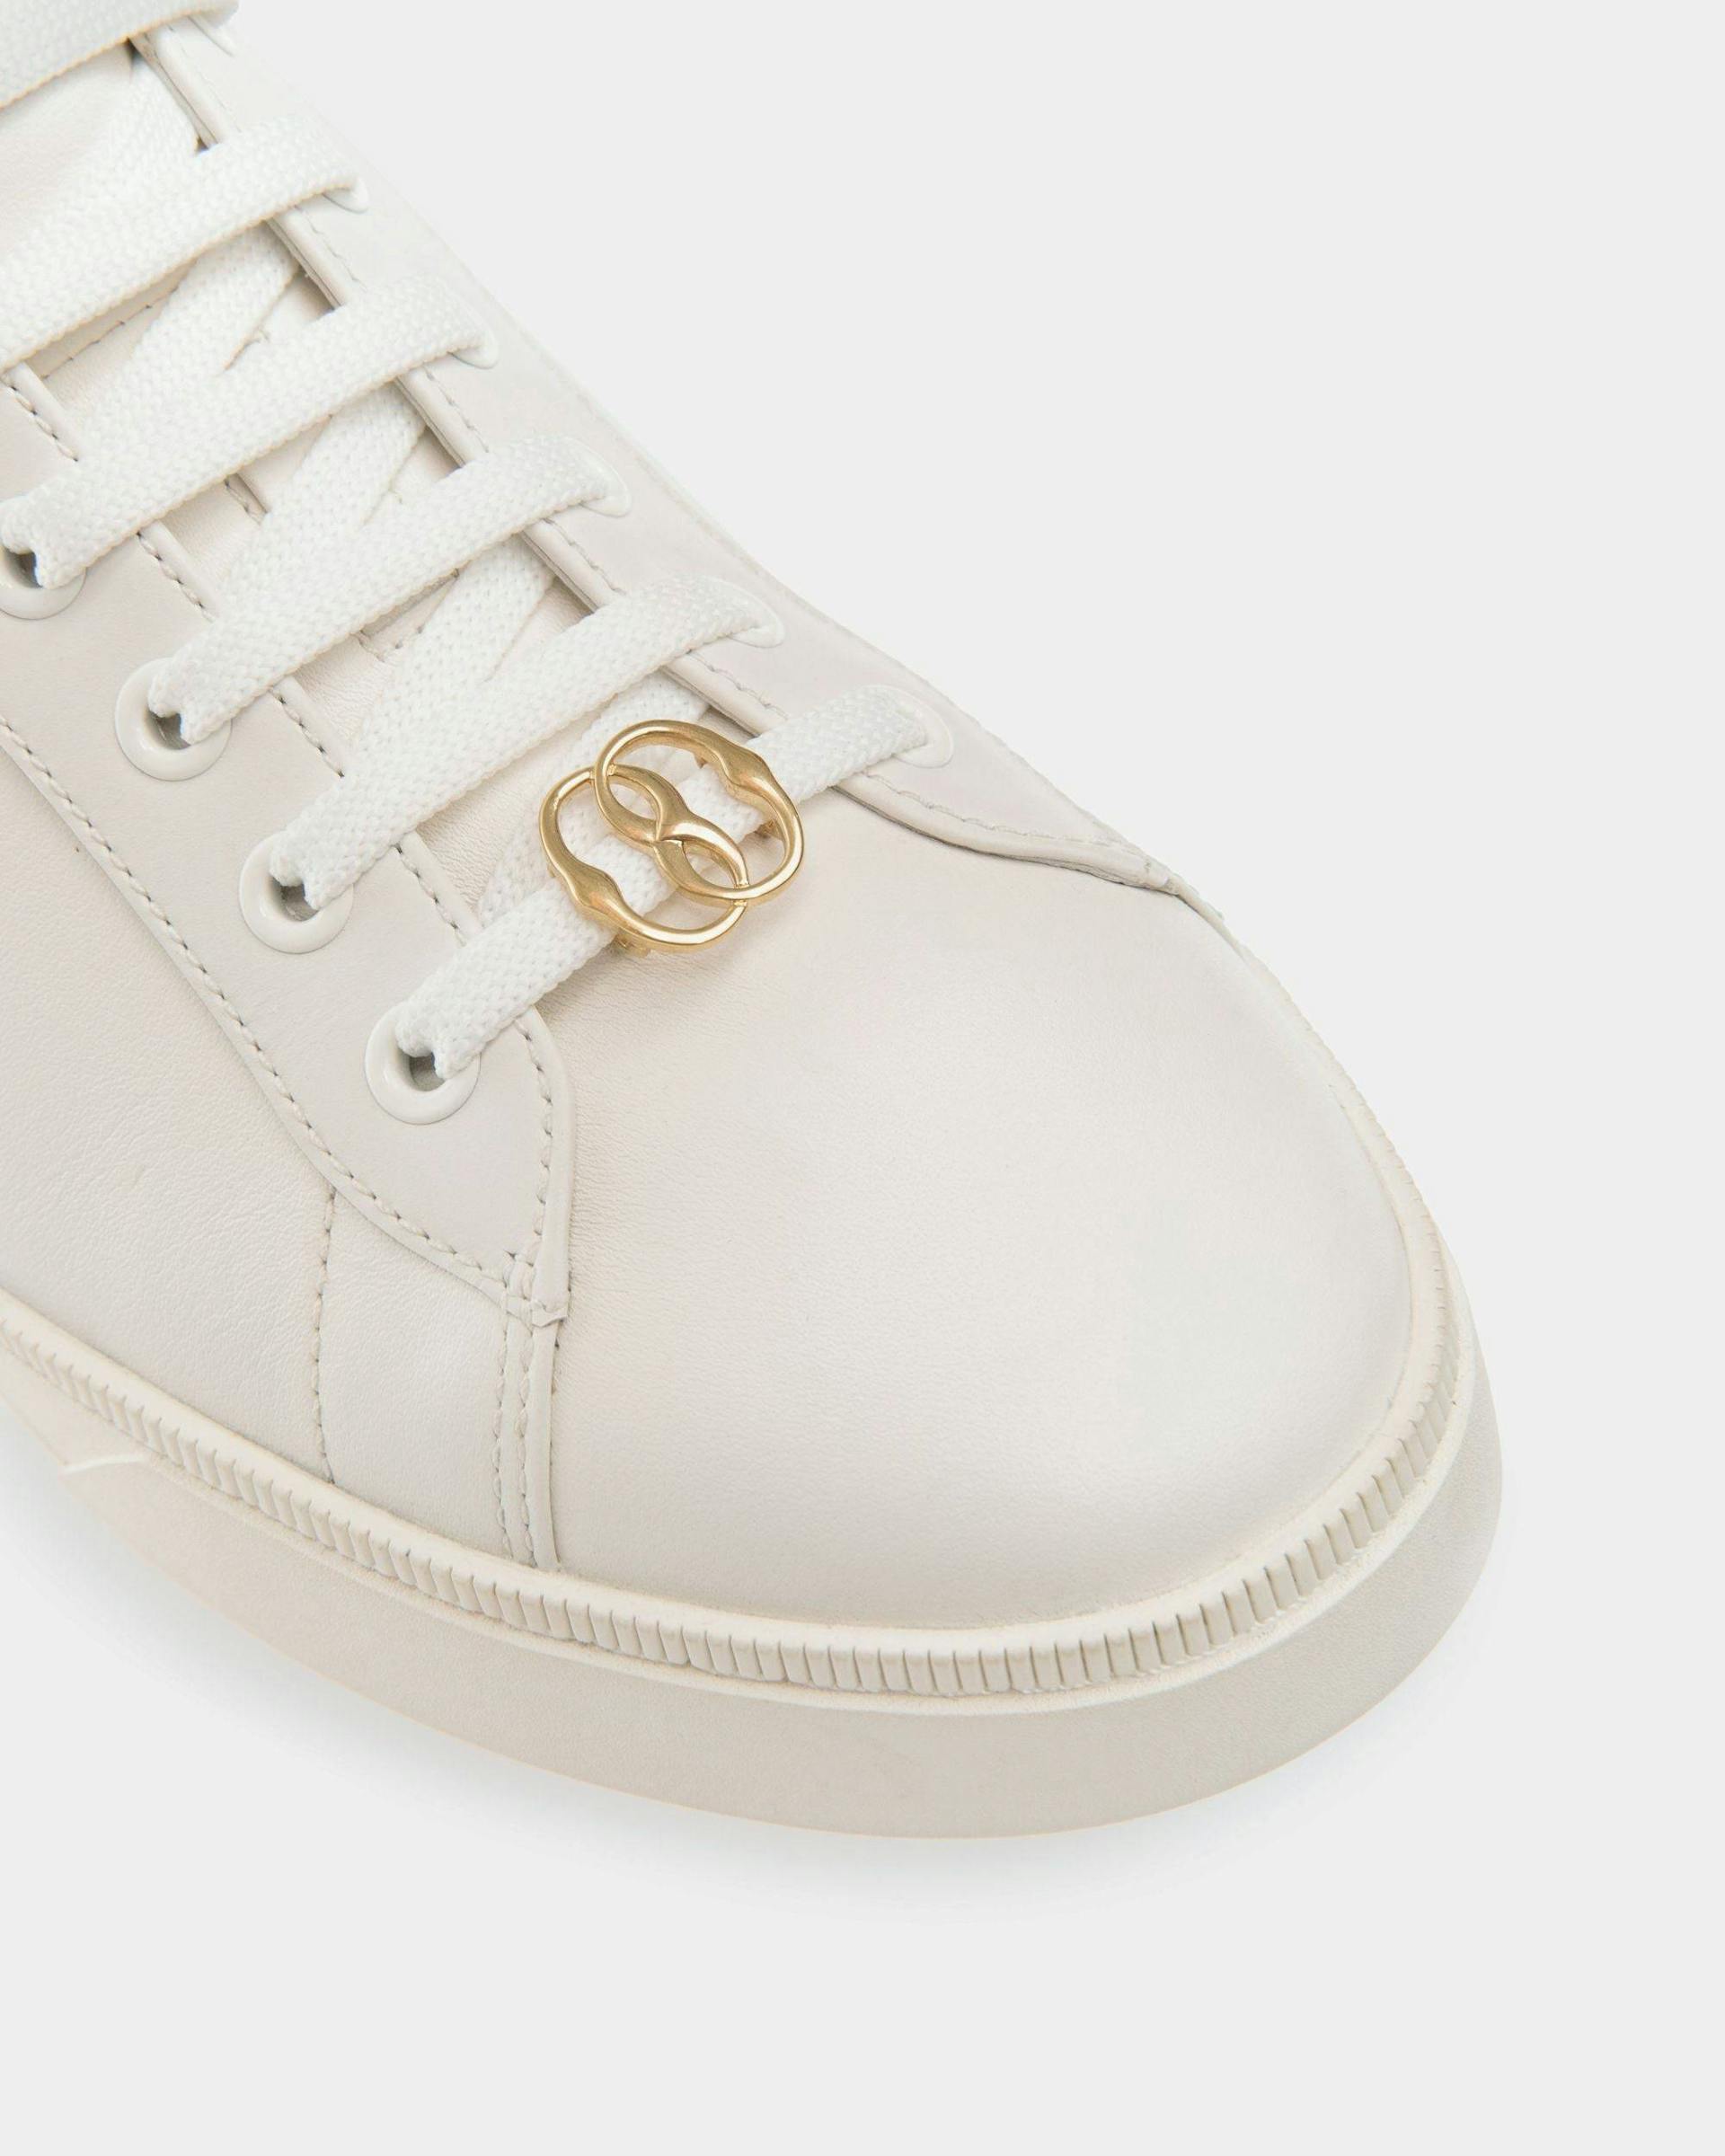 Raise Sneakers In White Leather - Men's - Bally - 07